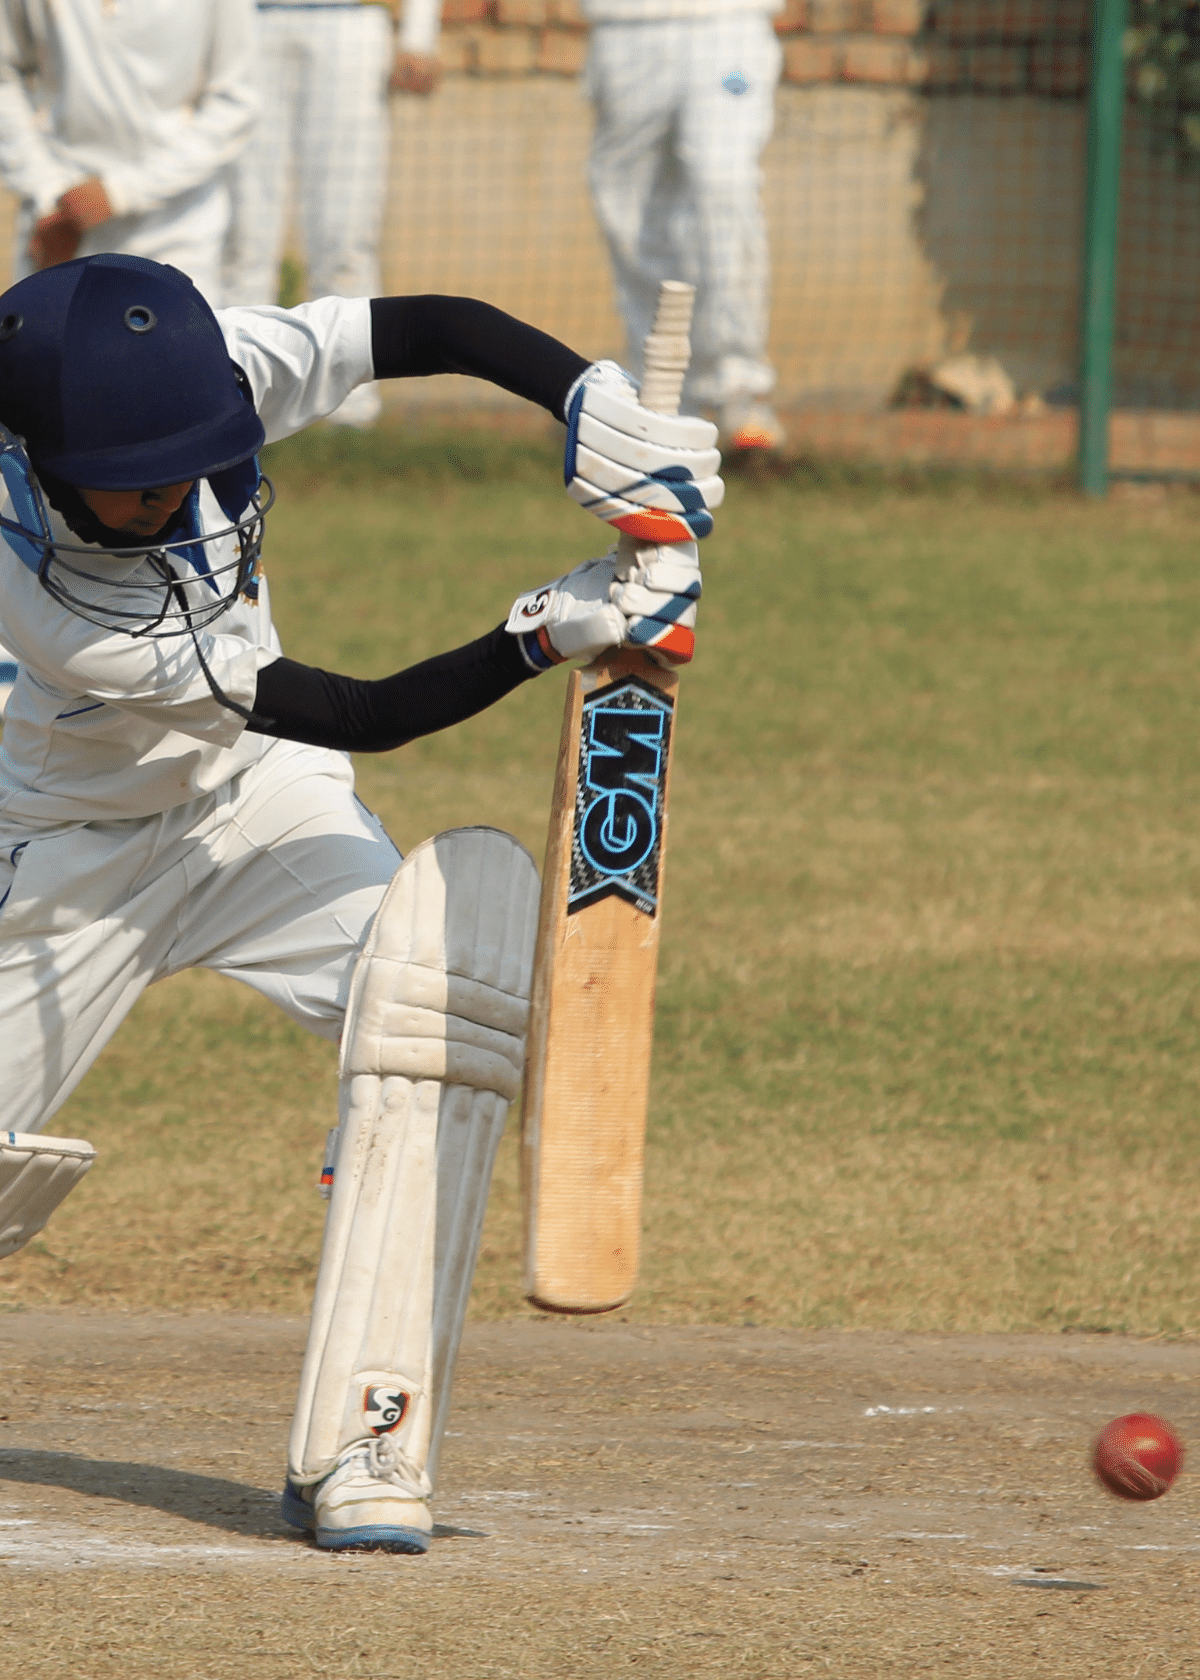 The Best Batting Gloves for Cricket to help improve your game